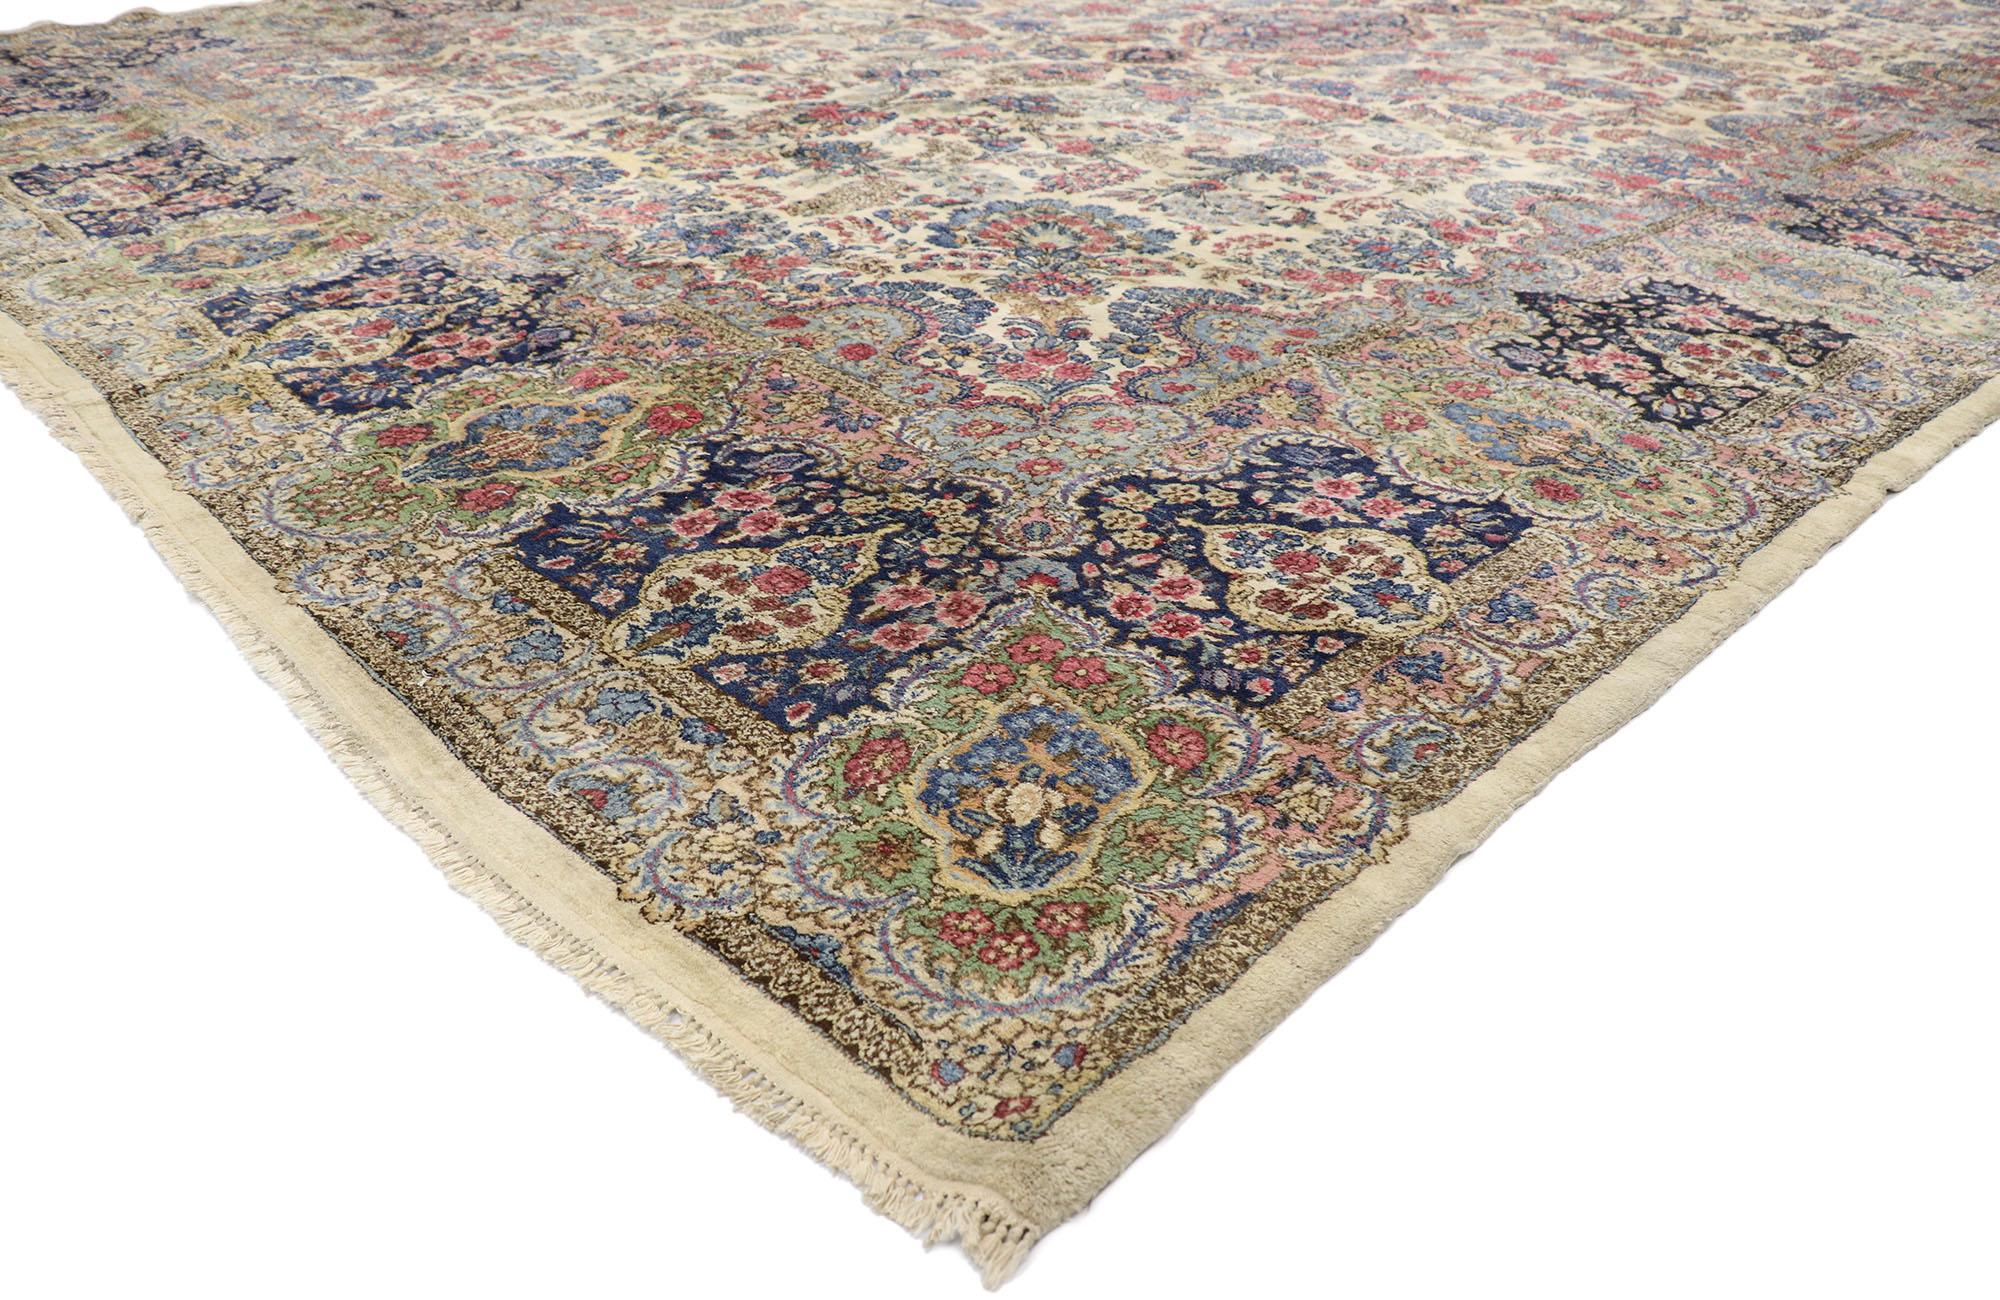 74979 vintage Kirman Palace size rug with Luxe Baroque style, Vintage Persian Kerman. Brilliant, alluring color pervades this vintage Kerman Persian palace size rug, a stunning testament to traditional Persian weaving. This hand-knotted wool Persian